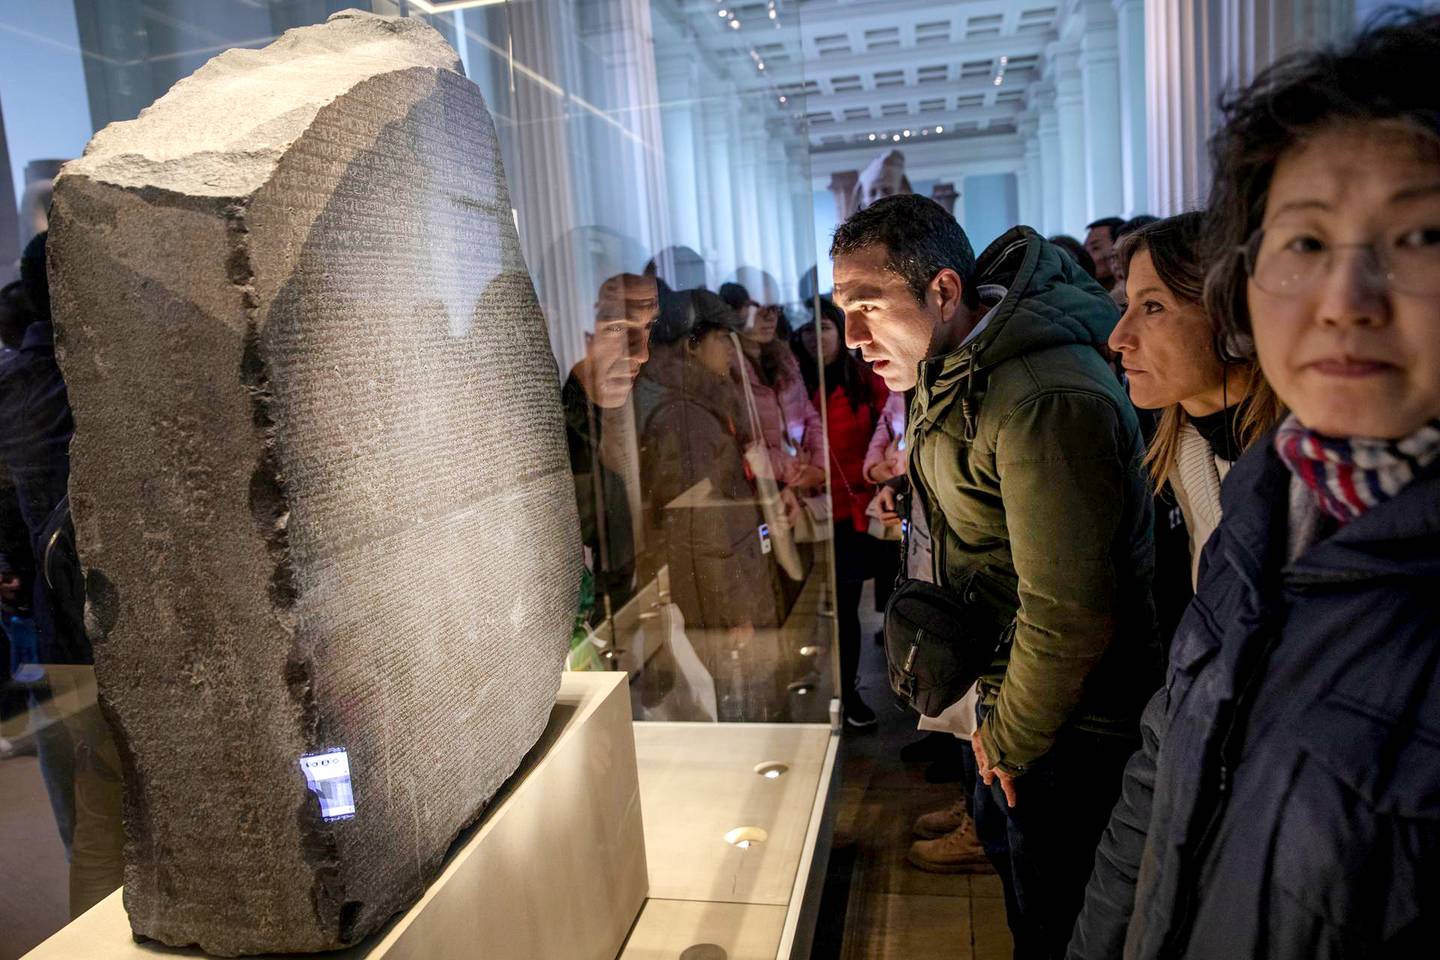 The Rosetta Stone at The British Museum, on November 22, 2018 in London. Getty